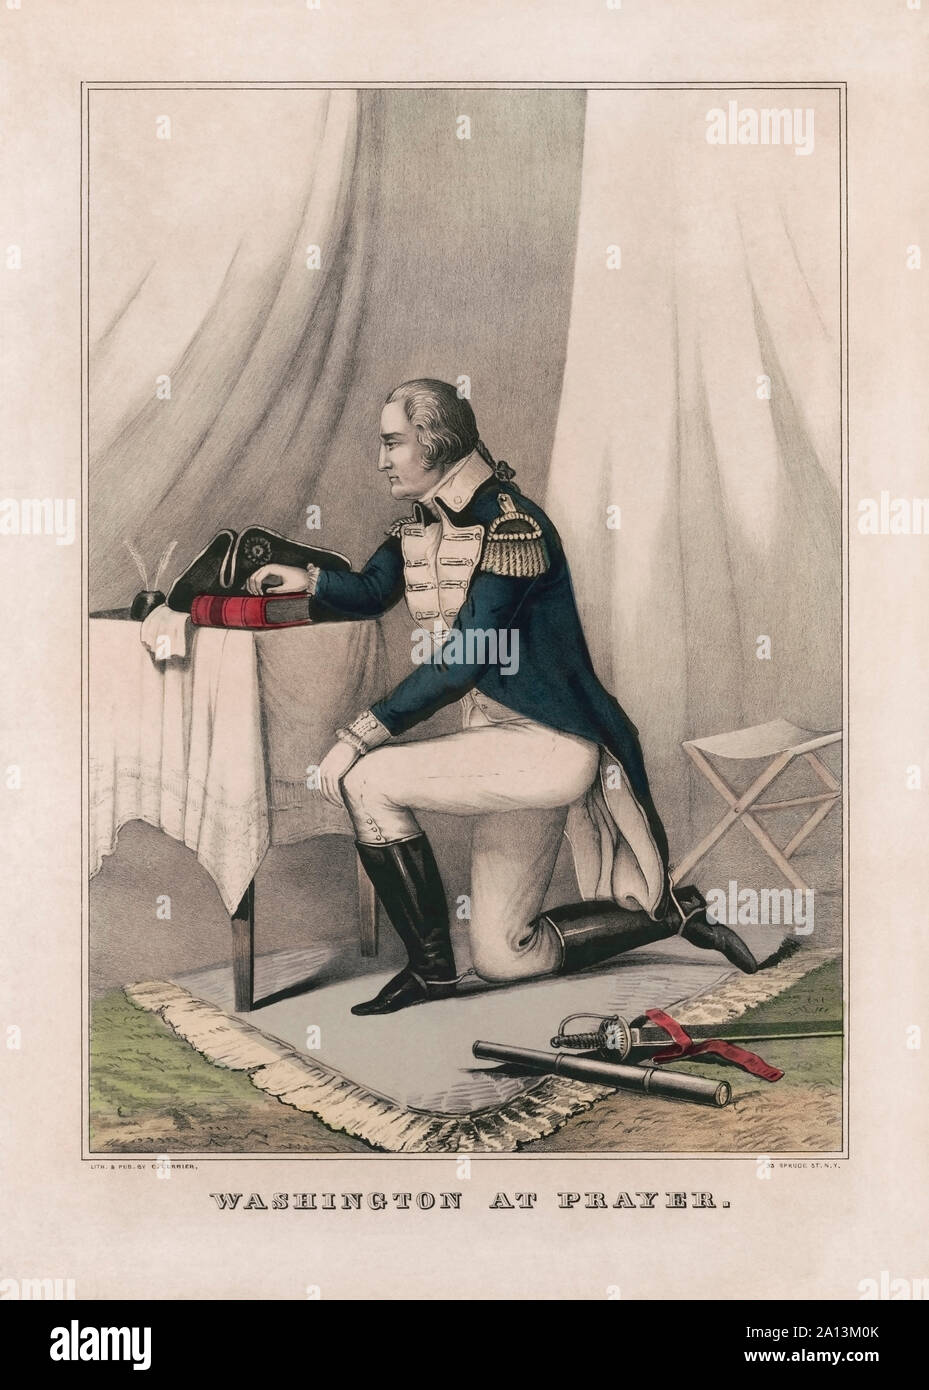 Military history print of General George Washington at prayer in his tent before battle. Stock Photo